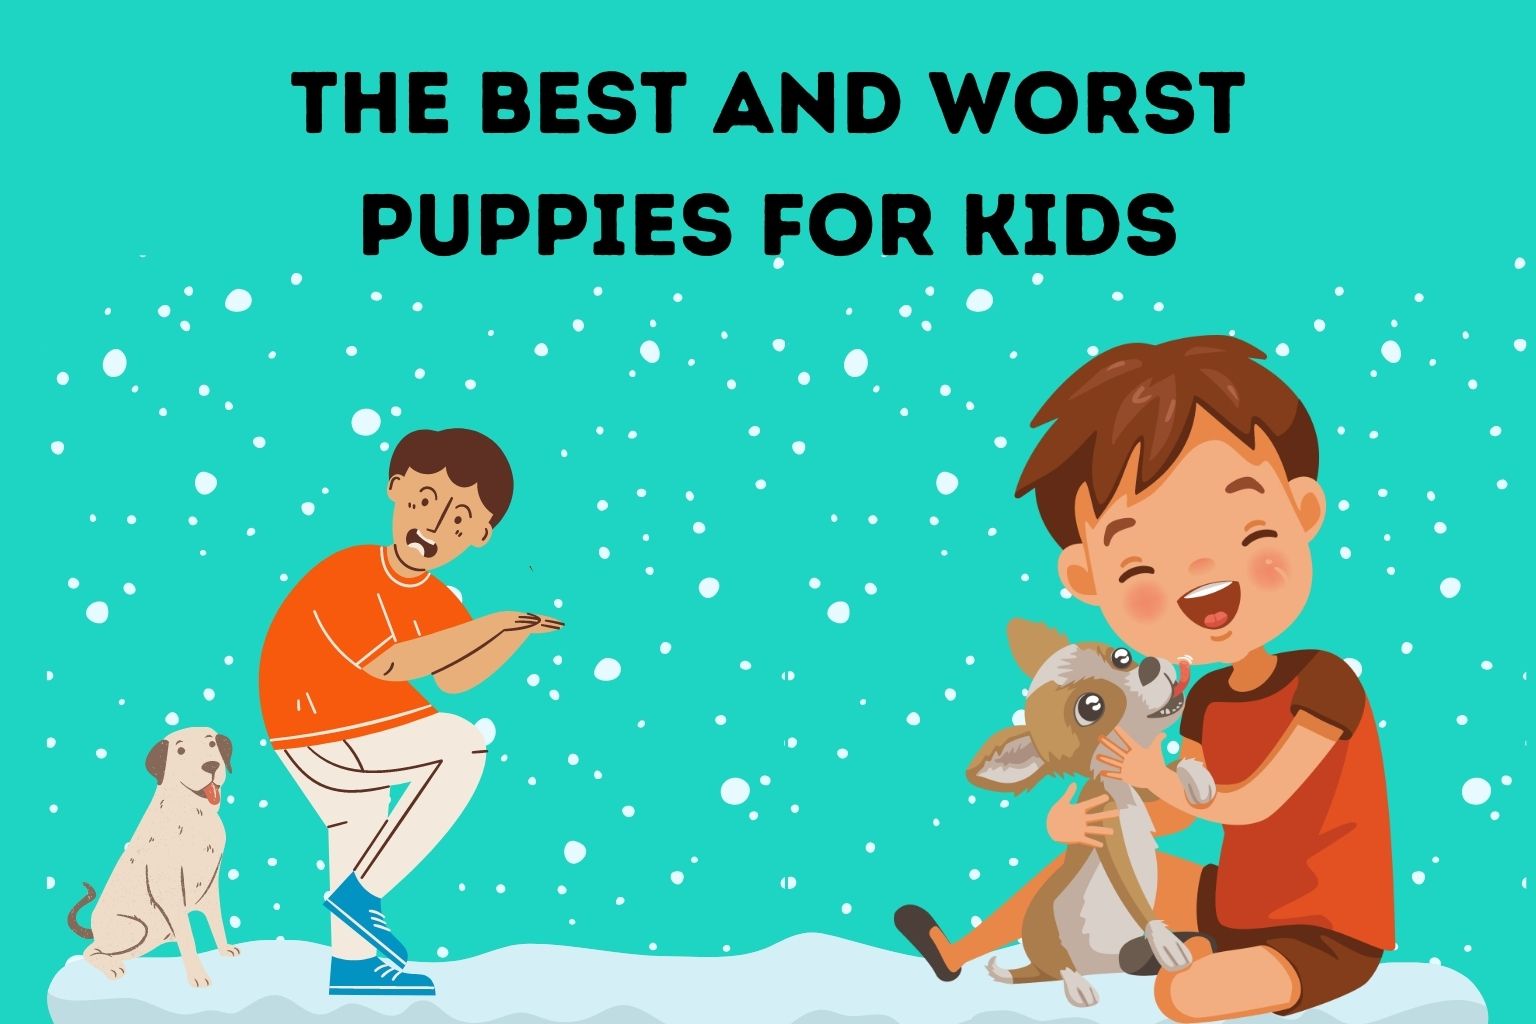 The Best and Worst Puppies for Kids